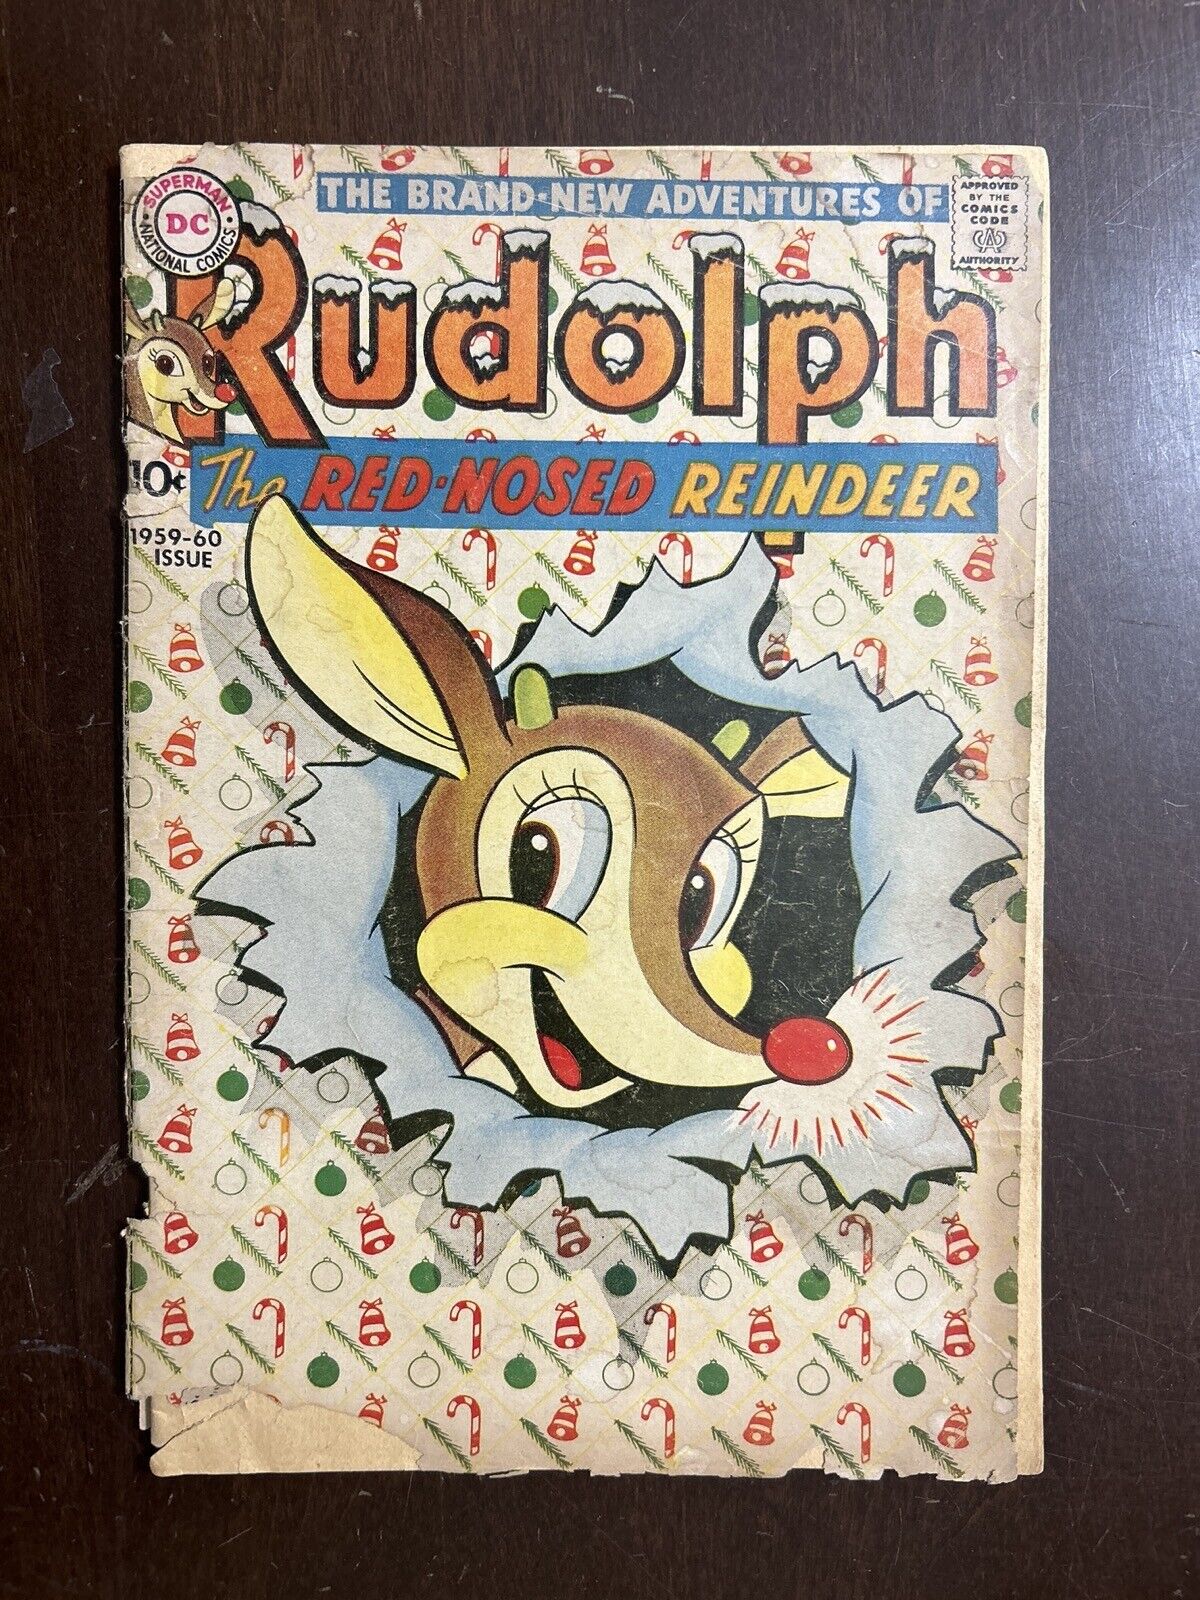 Rudolph the Red Nosed Reindeer DC Comics 1959-160 Fair 1.0